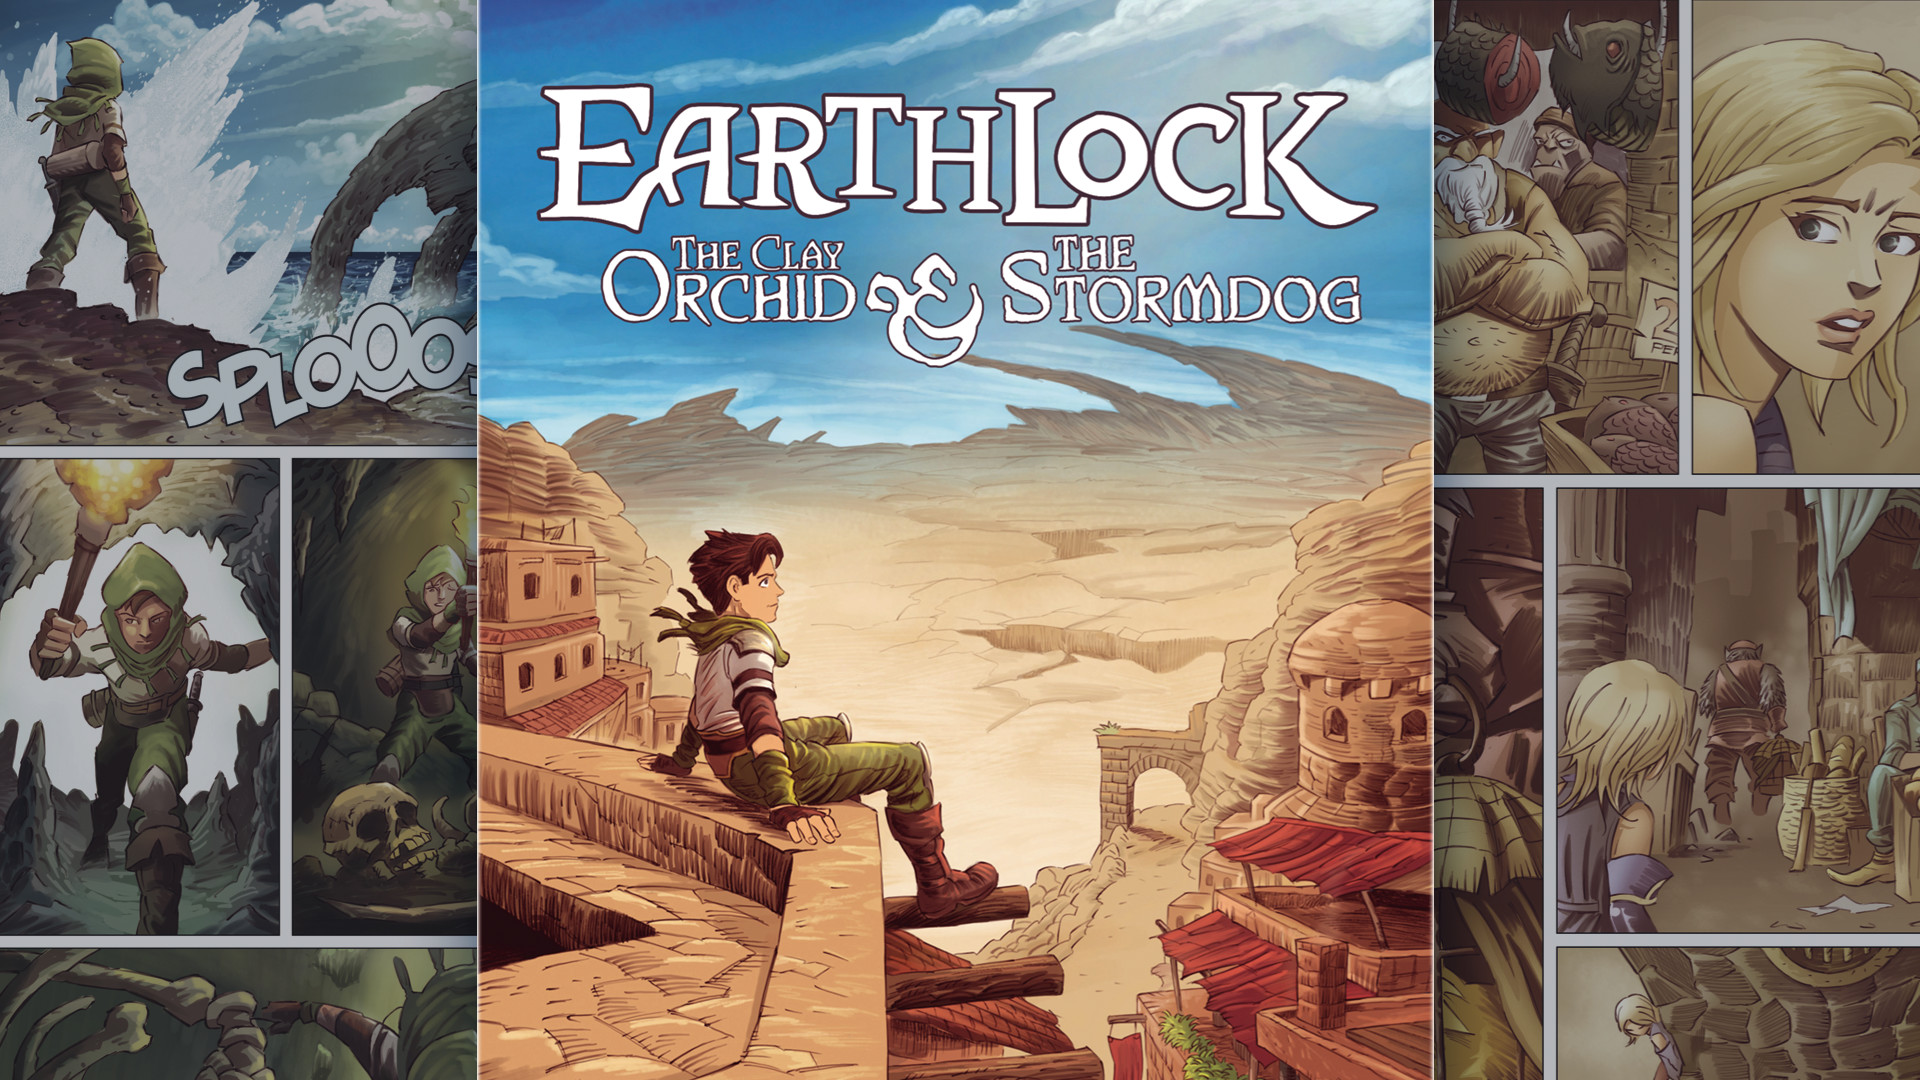 EARTHLOCK - Comic Book #1 - The Storm Dog & The Clay Orchid screenshot